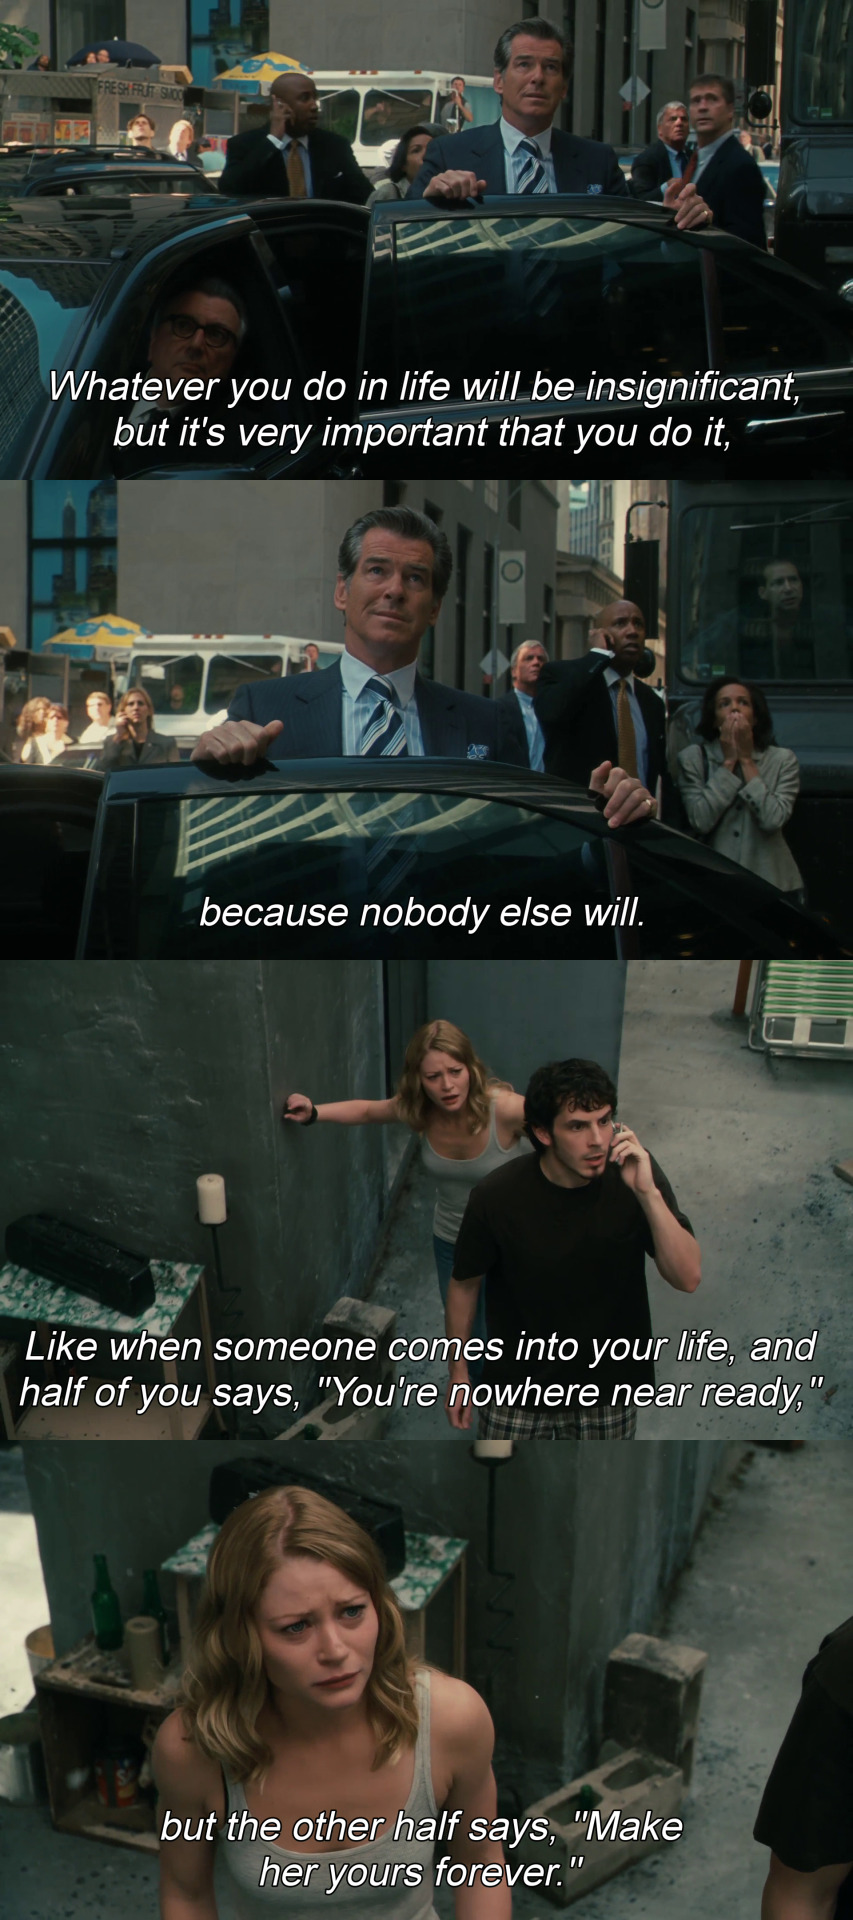 remember me movie quotes